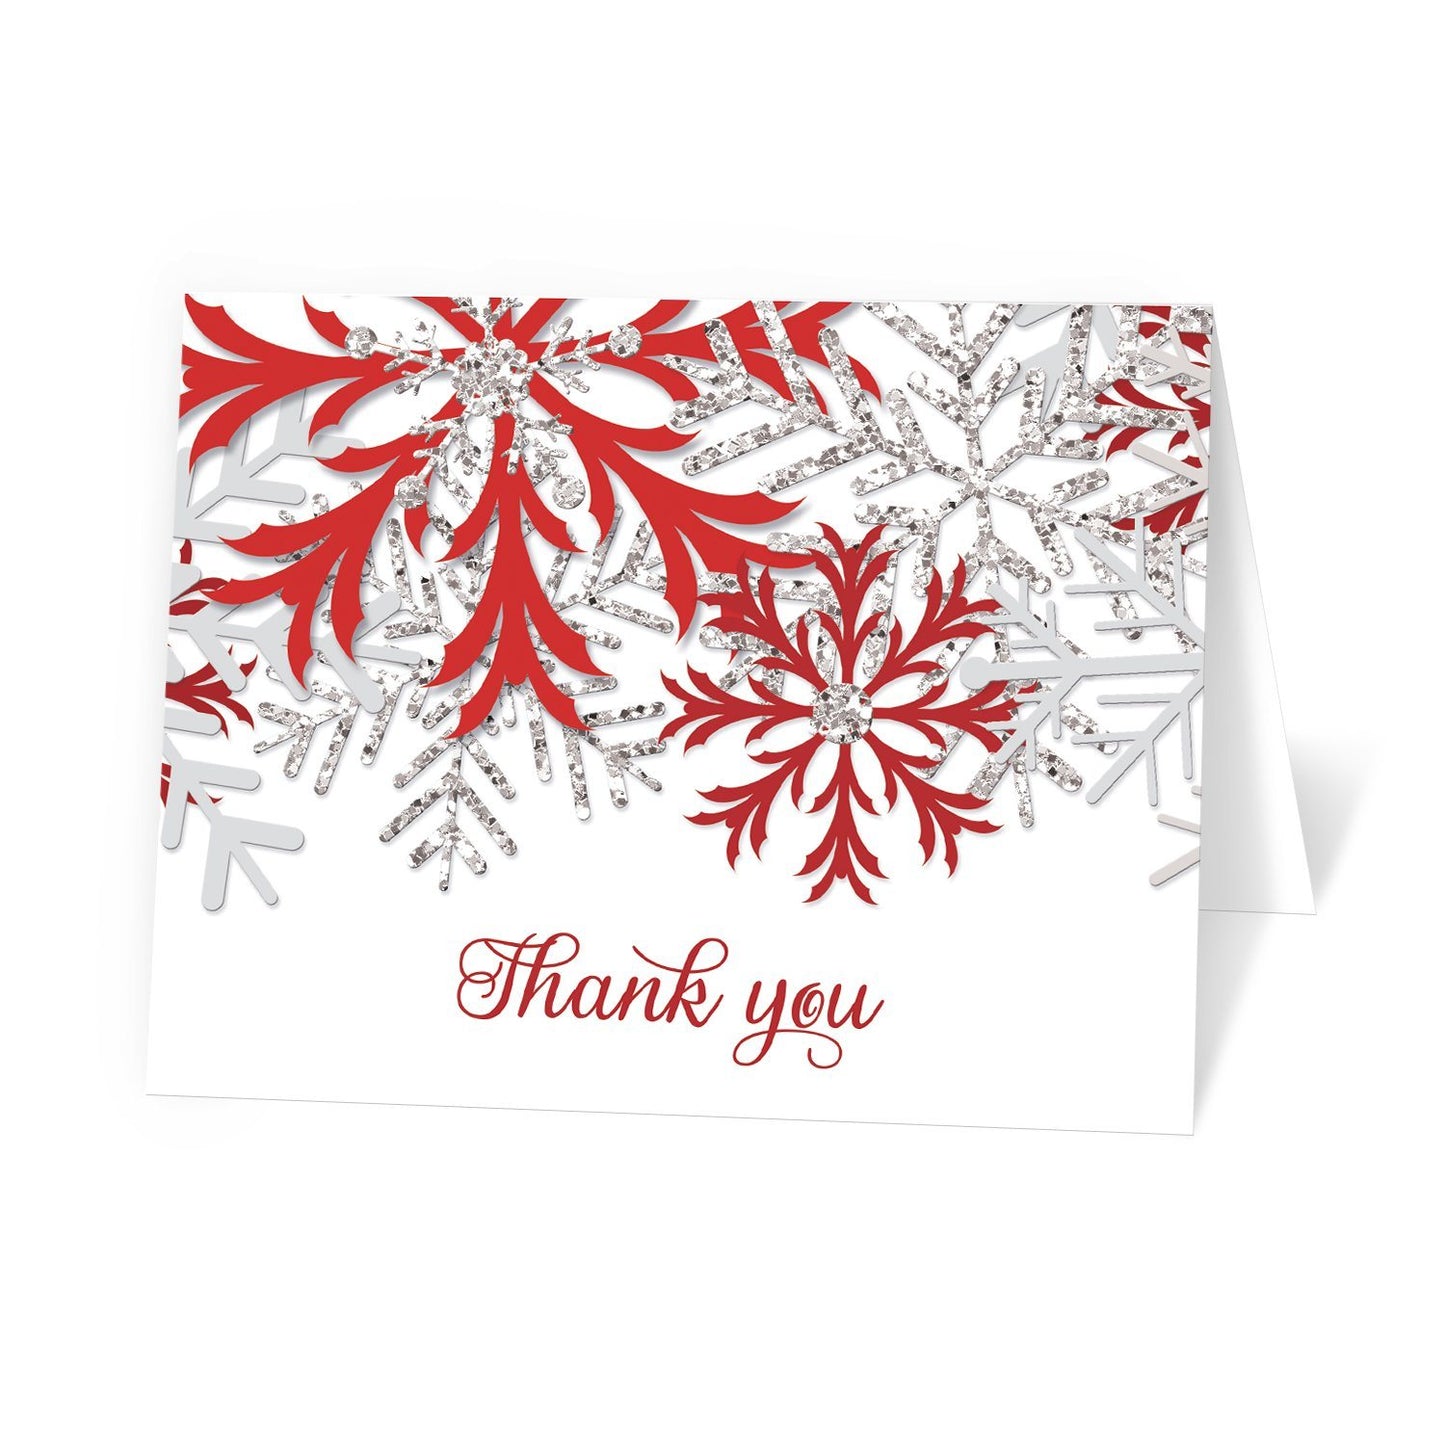 Winter Red Silver Snowflake Thank You Cards at Artistically Invited. Winter red silver snowflake thank you cards with red and silver-colored glitter-illustrated snowflakes over a white background and 'Thank you' printed in a whimsical red script font. 